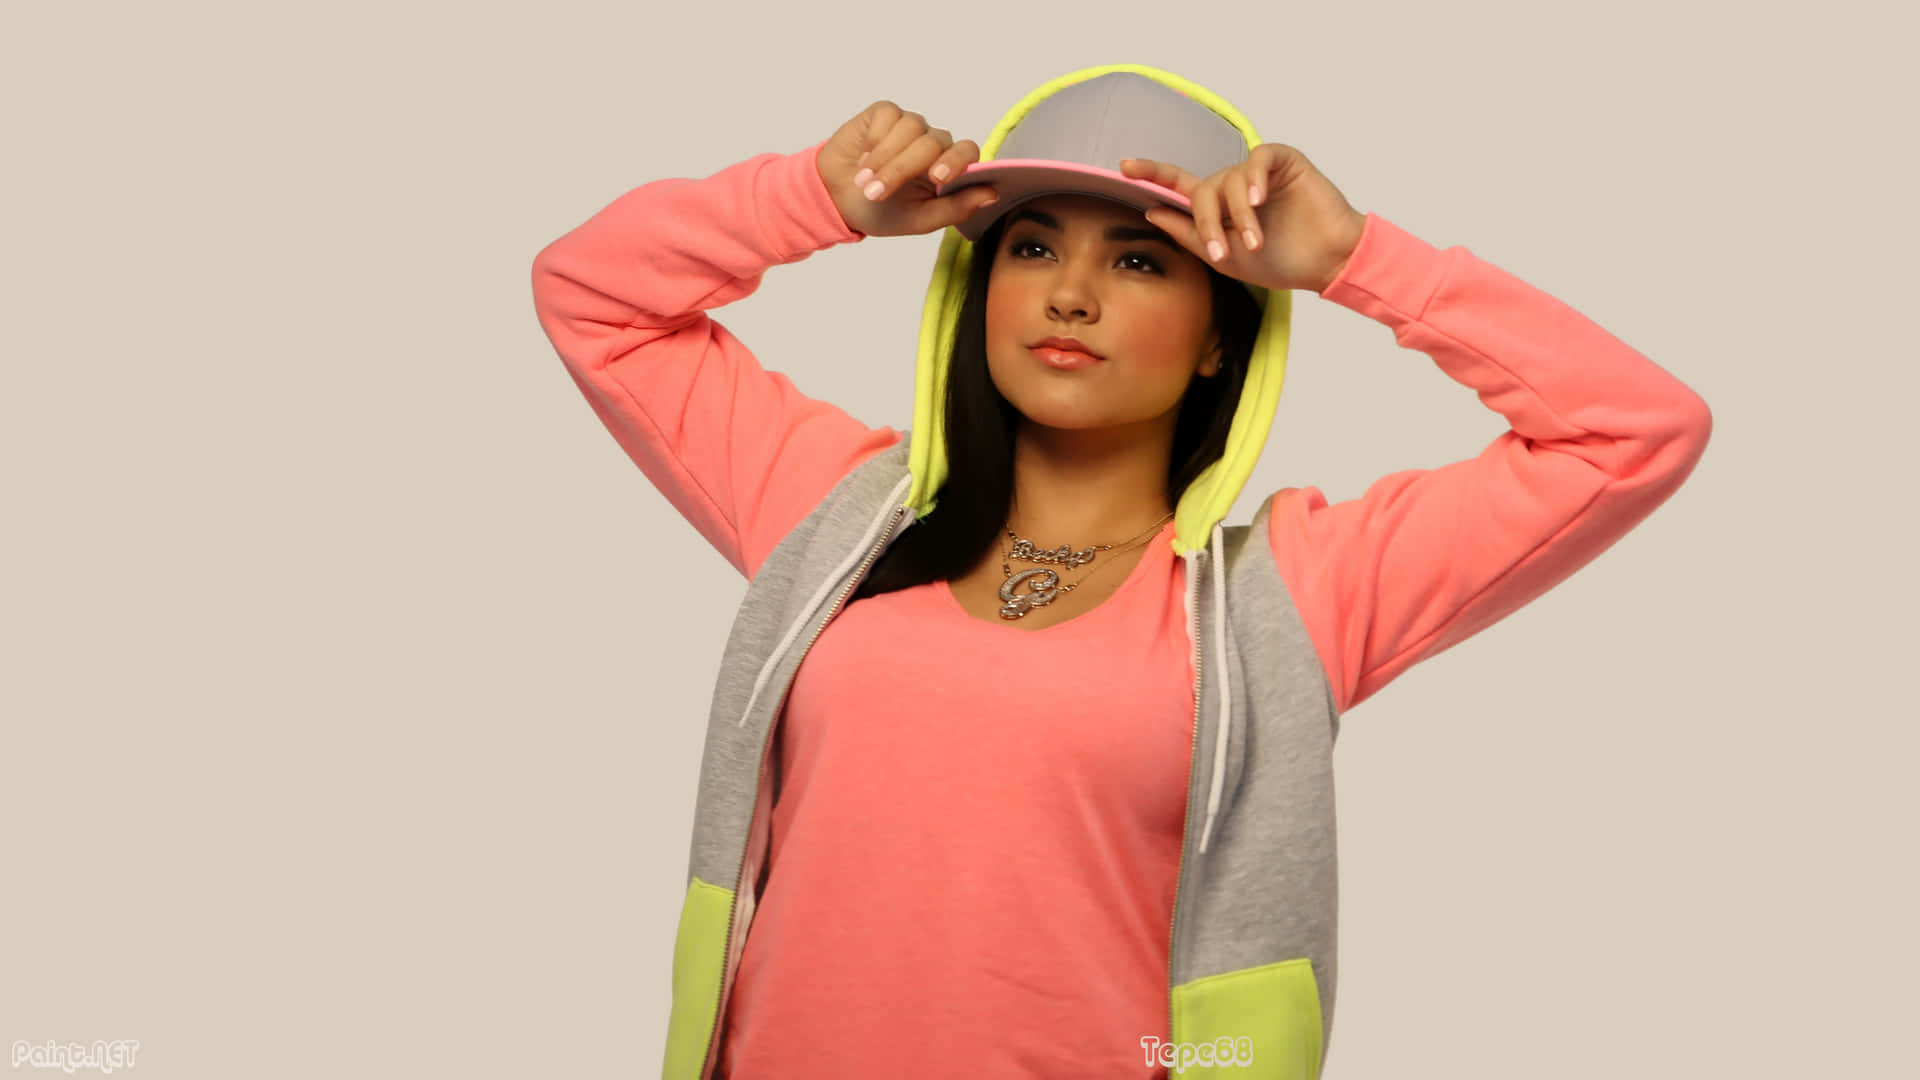 Singer and rapper, Becky G, focusing on her music.